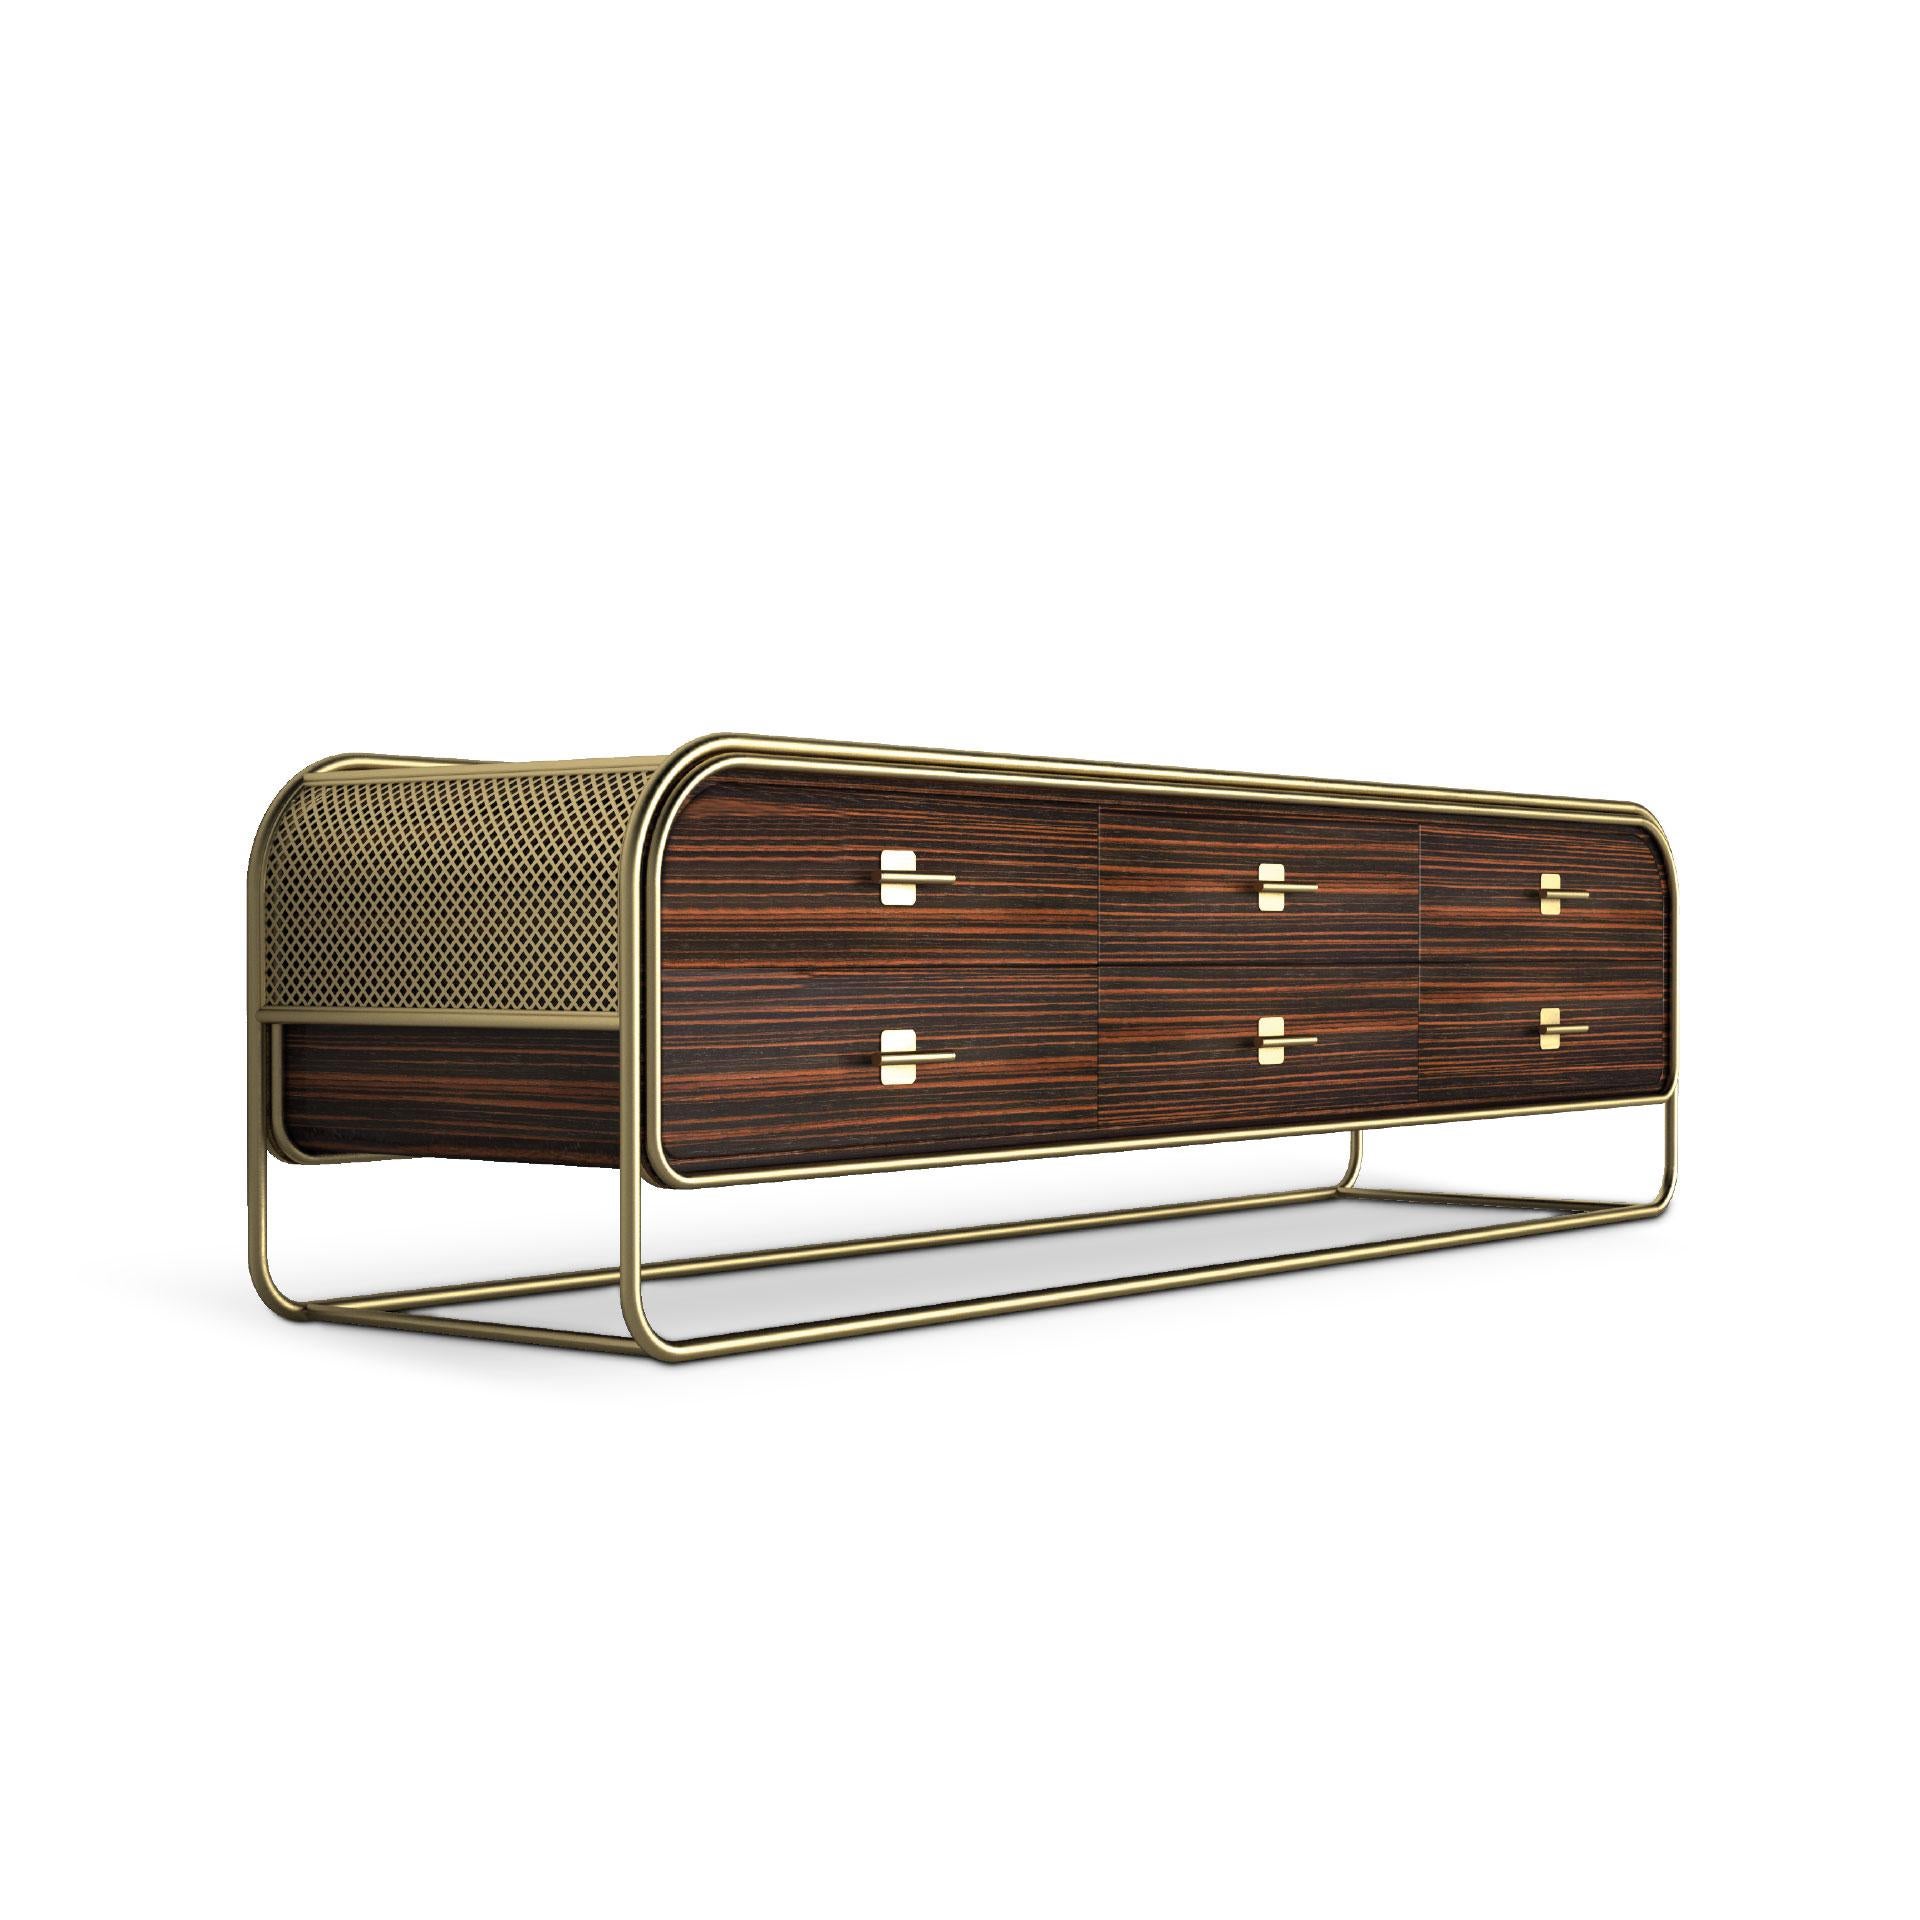 Known as “one of the great grand dames of Art Deco Streamline Moderne in Los Angeles”, the Eastern Columbia Building inspired Porus Studio Design team to create the Columbia Family. 
This modern sideboard features a stunning brushed brass frame and